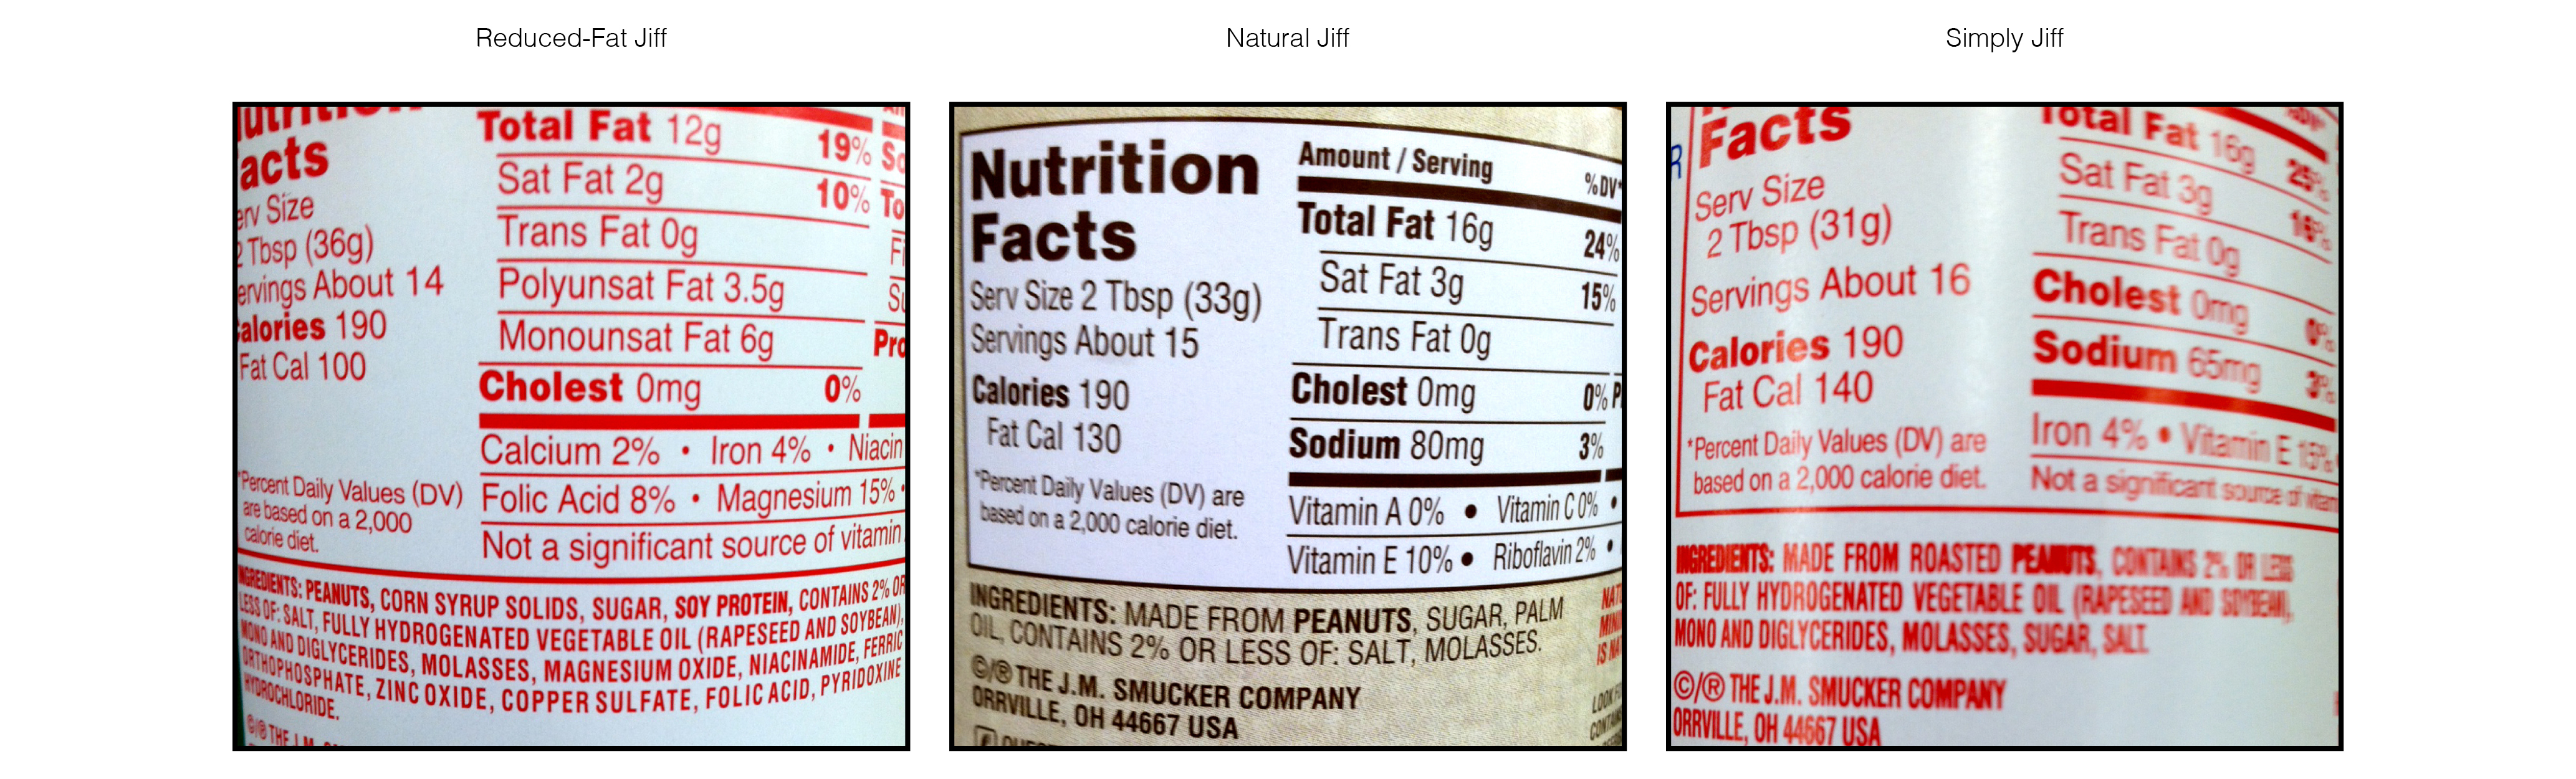 Jif Reduced Fat Peanut Butter Nutrition Facts 108